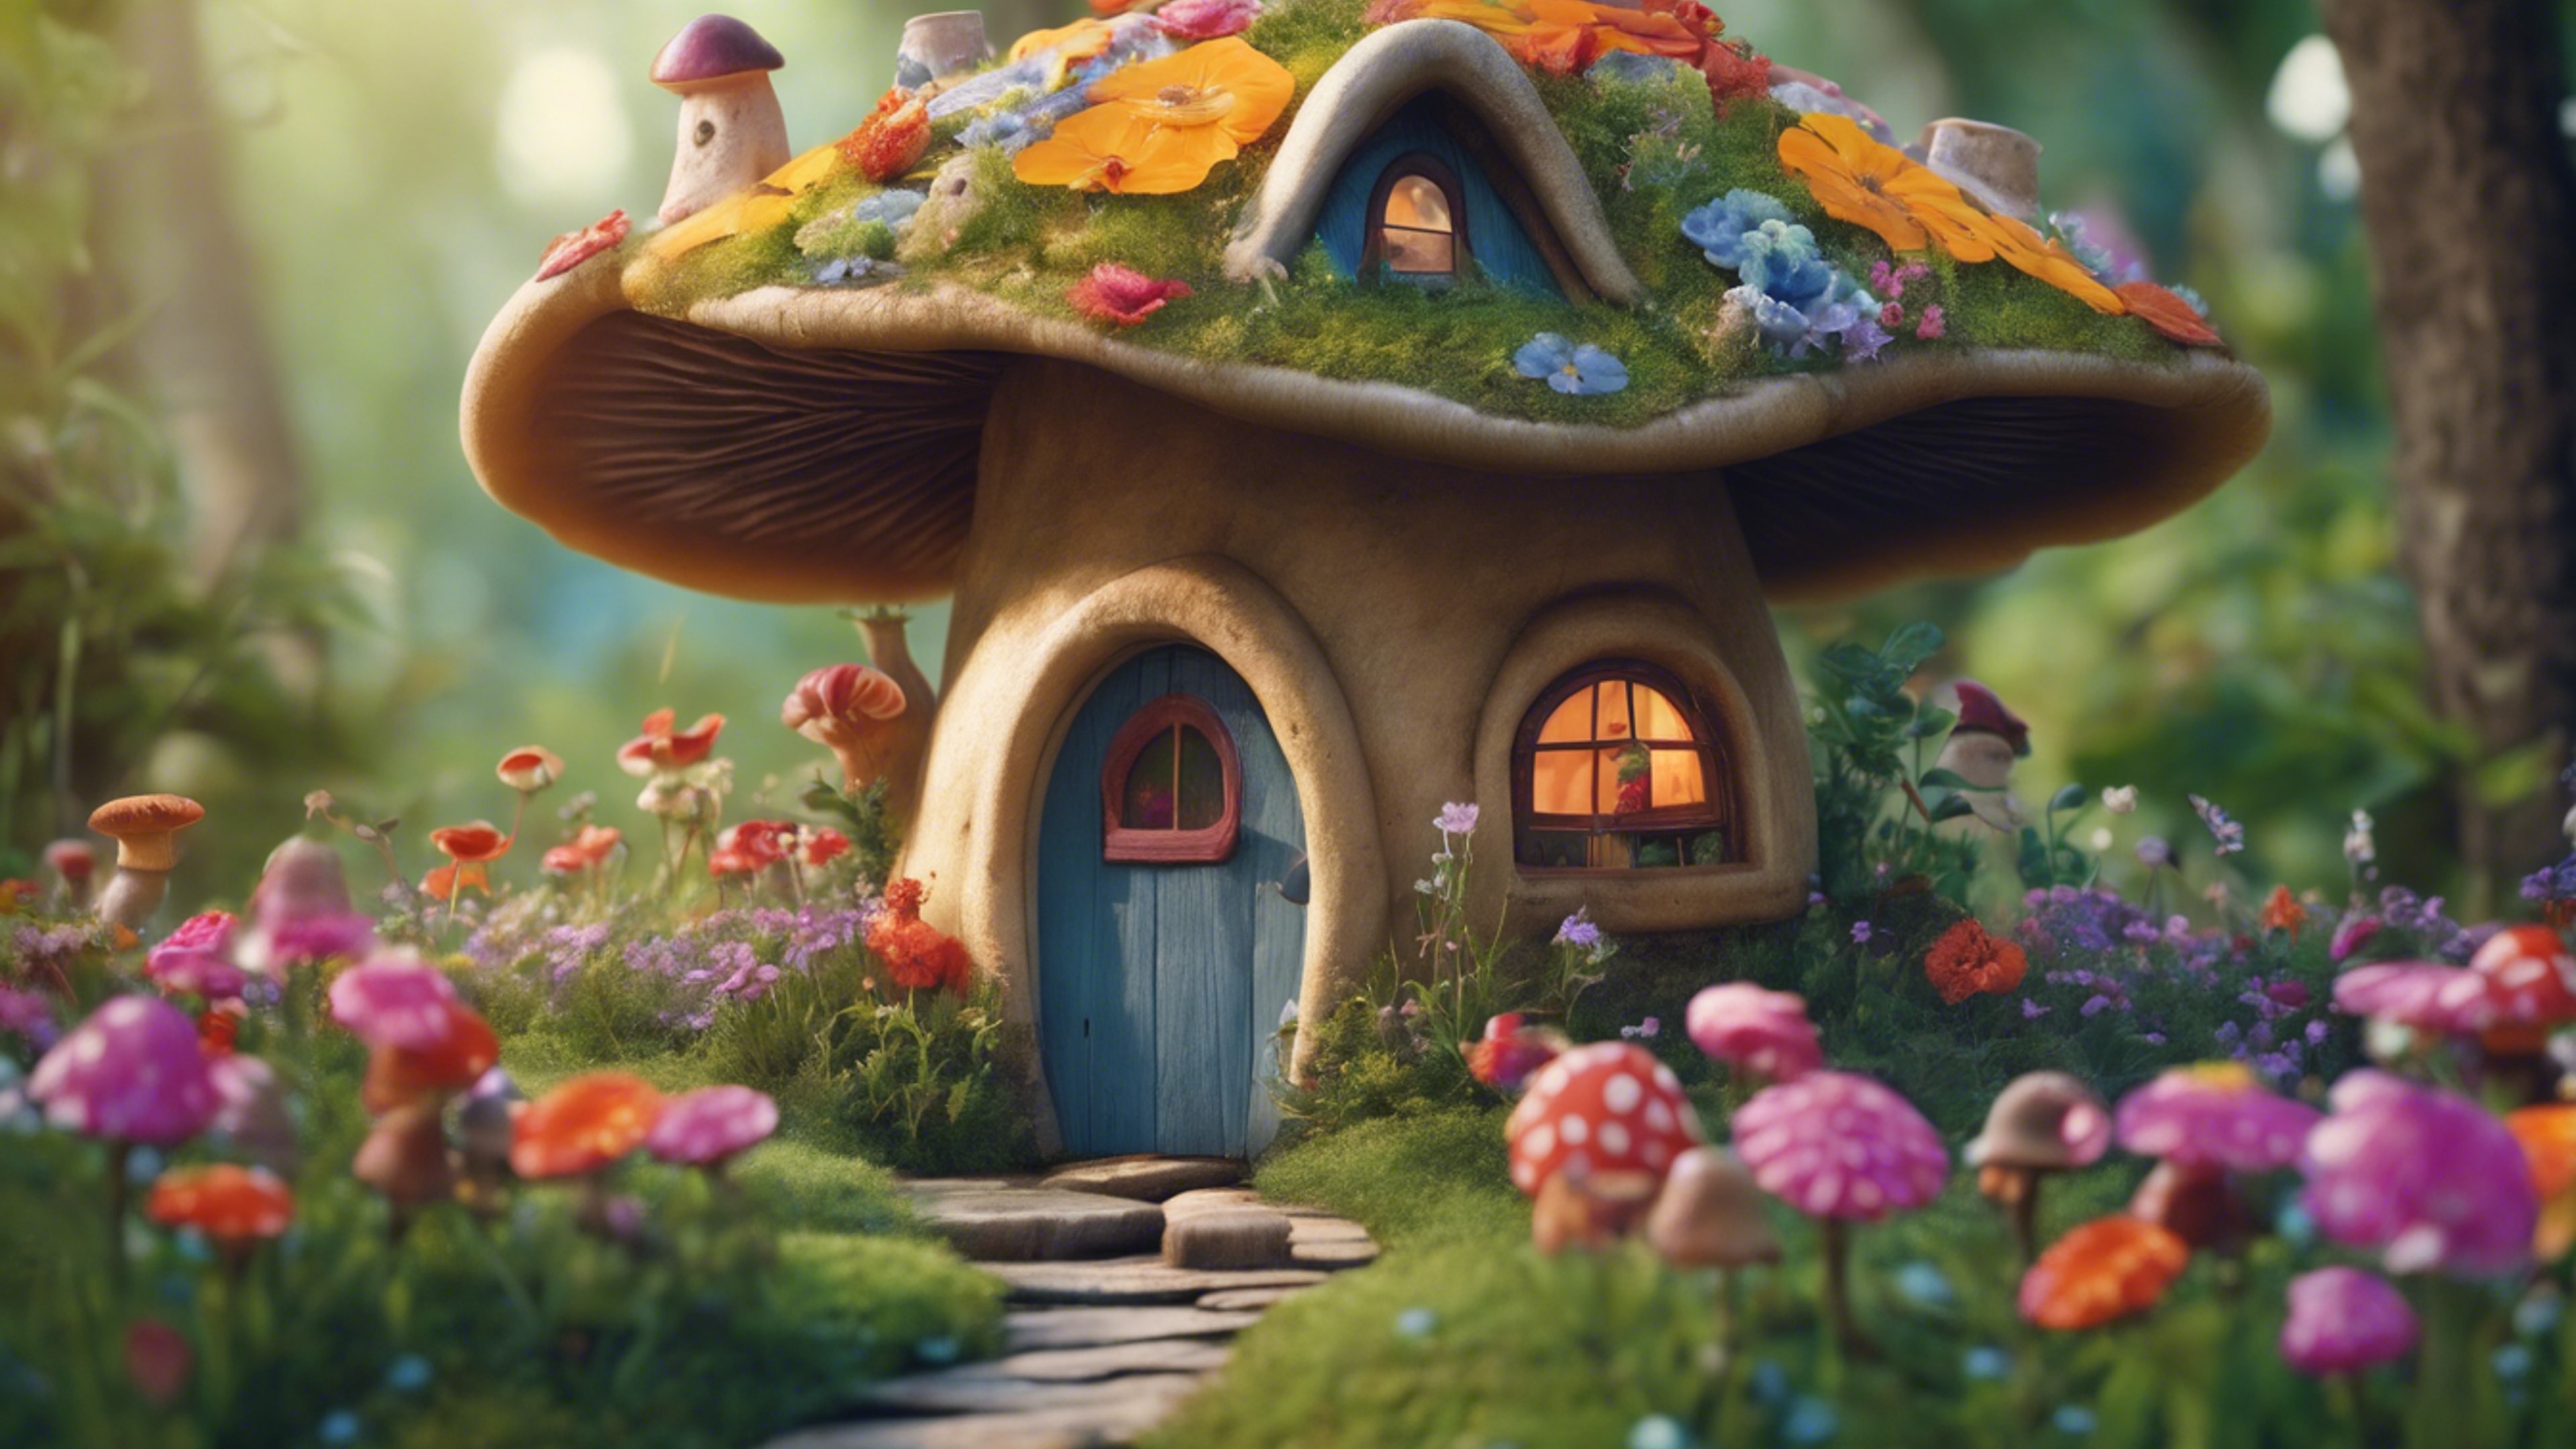 An old-fashioned, whimsical mushroom house, straight out of a children's storybook, nestled amid colorful flowers at the end of a winding path. Ფონი[bbbff29f860842789321]